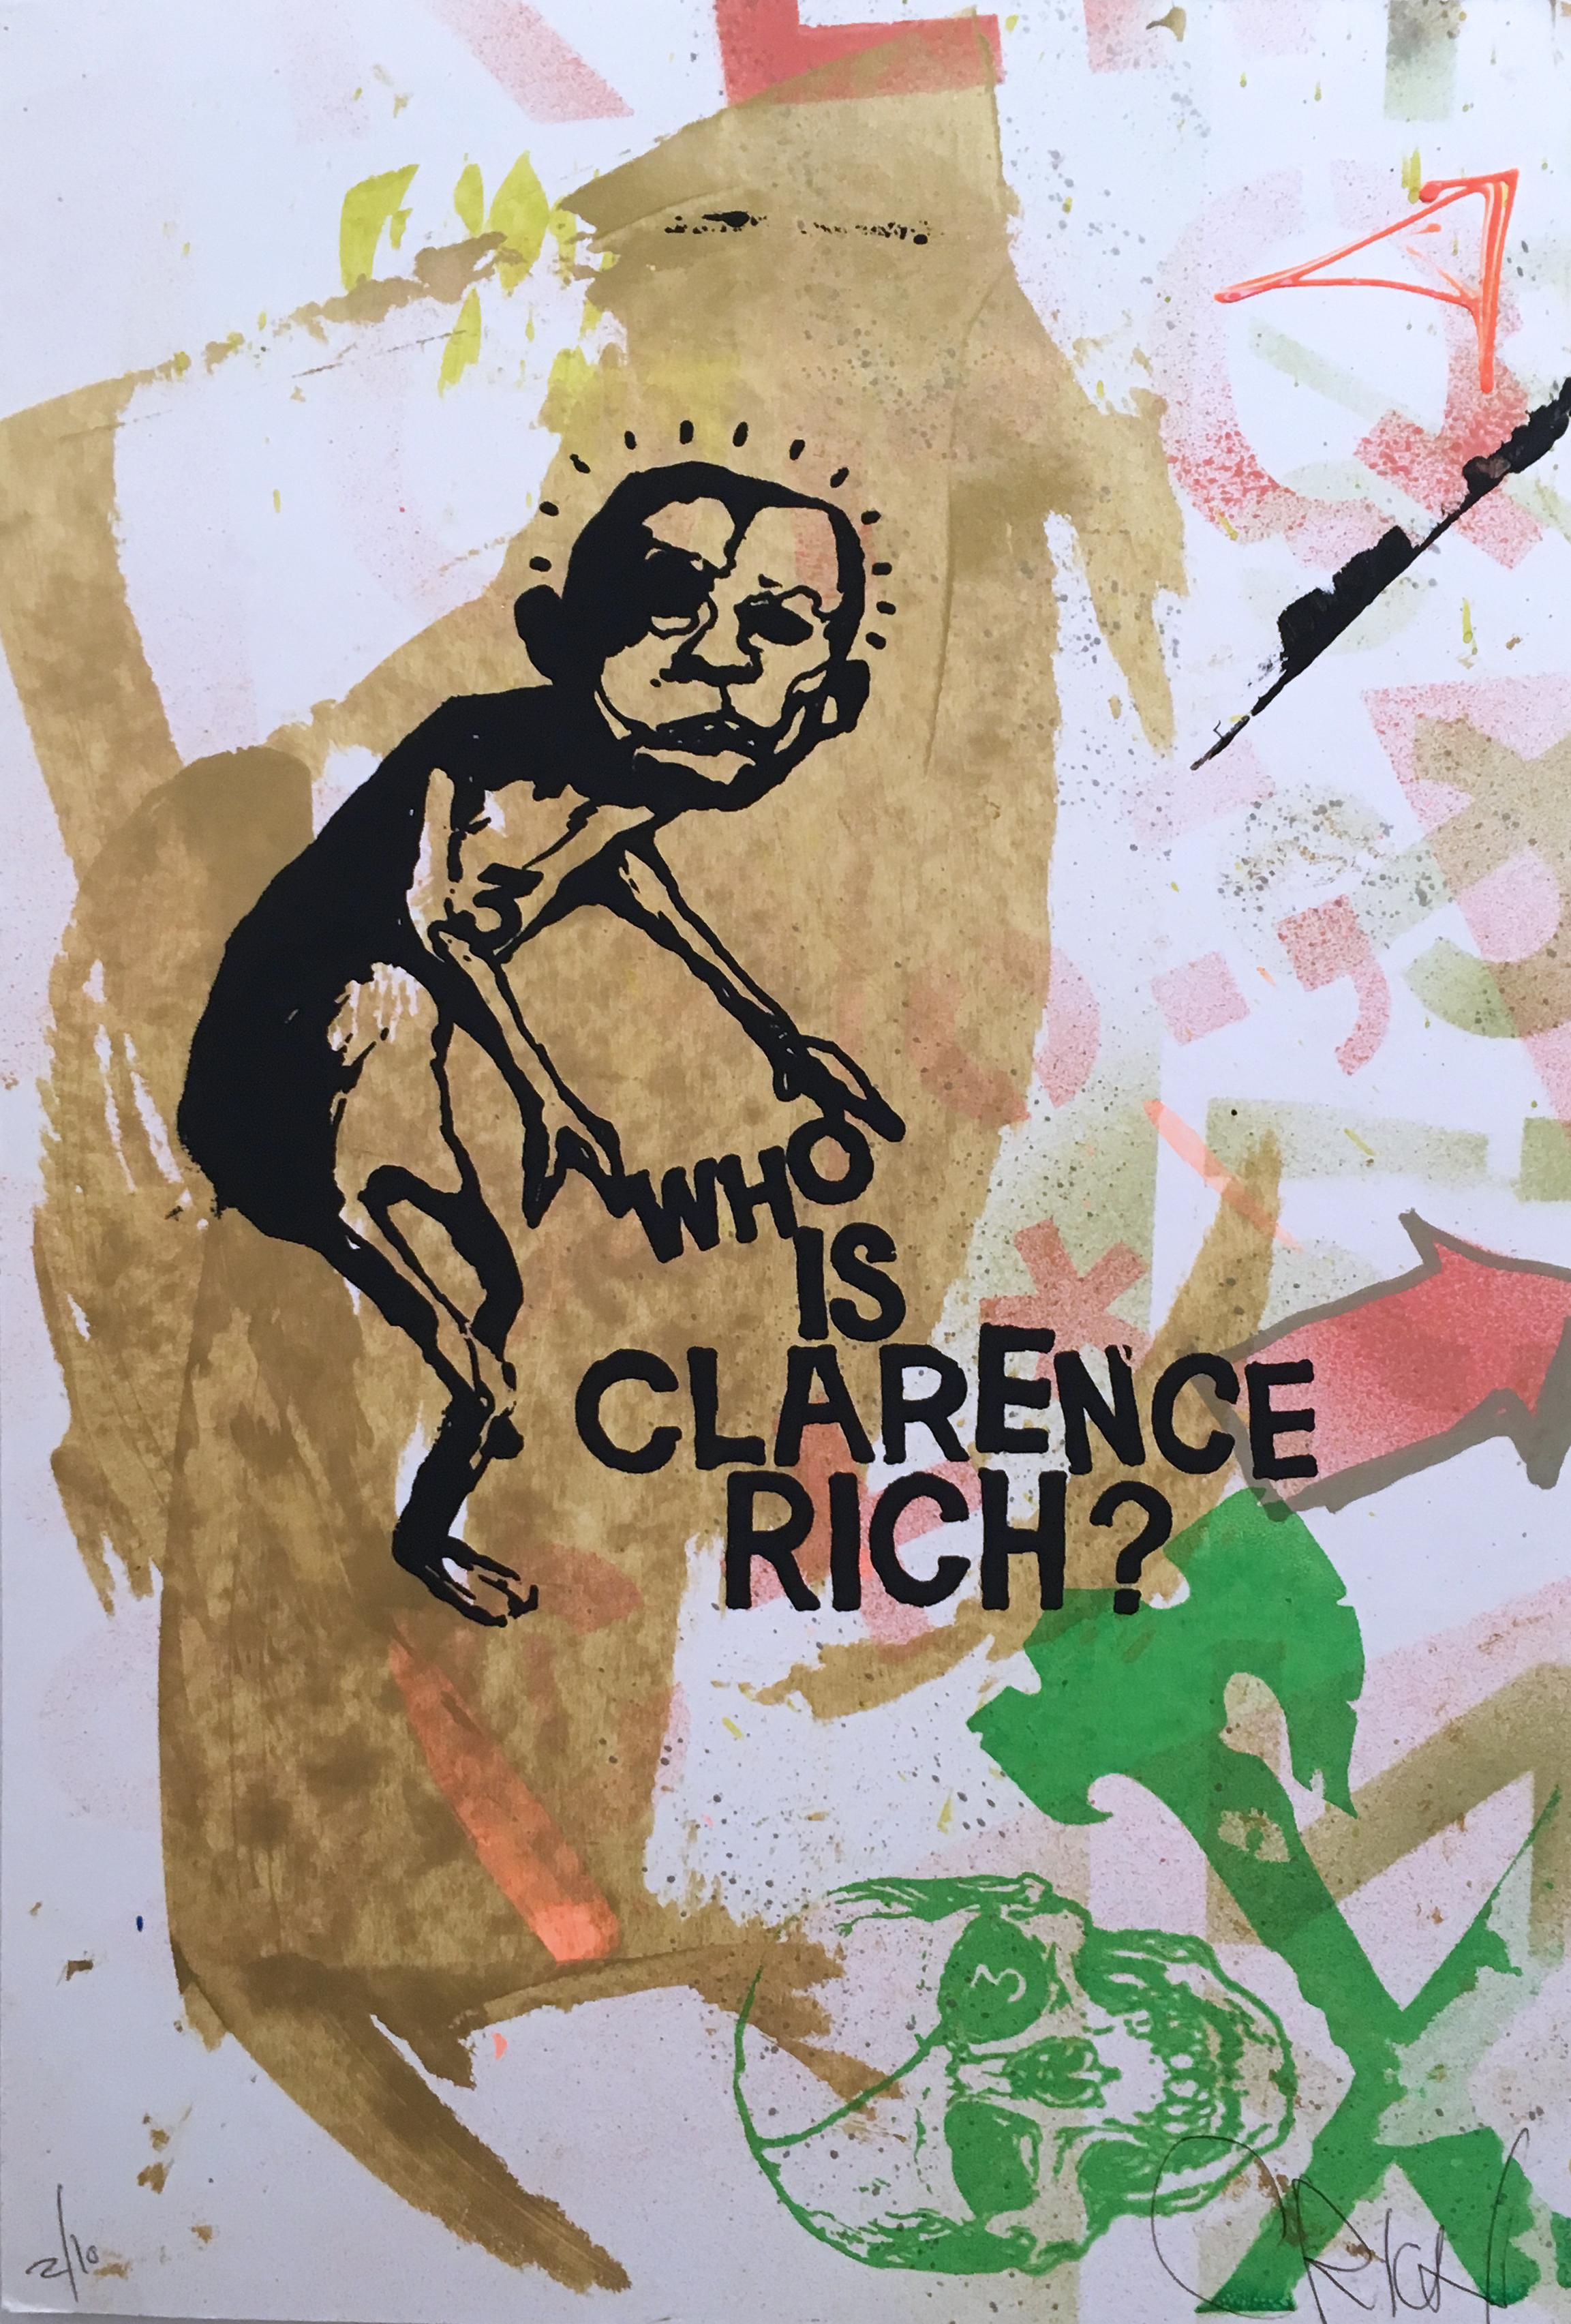 "Who Is Clarence Rich" (2017) by Clarence Rich
Silkscreen, acrylic and ink on paper
Clarence Rich is a 25 year graffiti veteran and street artist who is also a formally trained painter. 

Abstract Art / Graffiti and Street Art / Text / Bright and